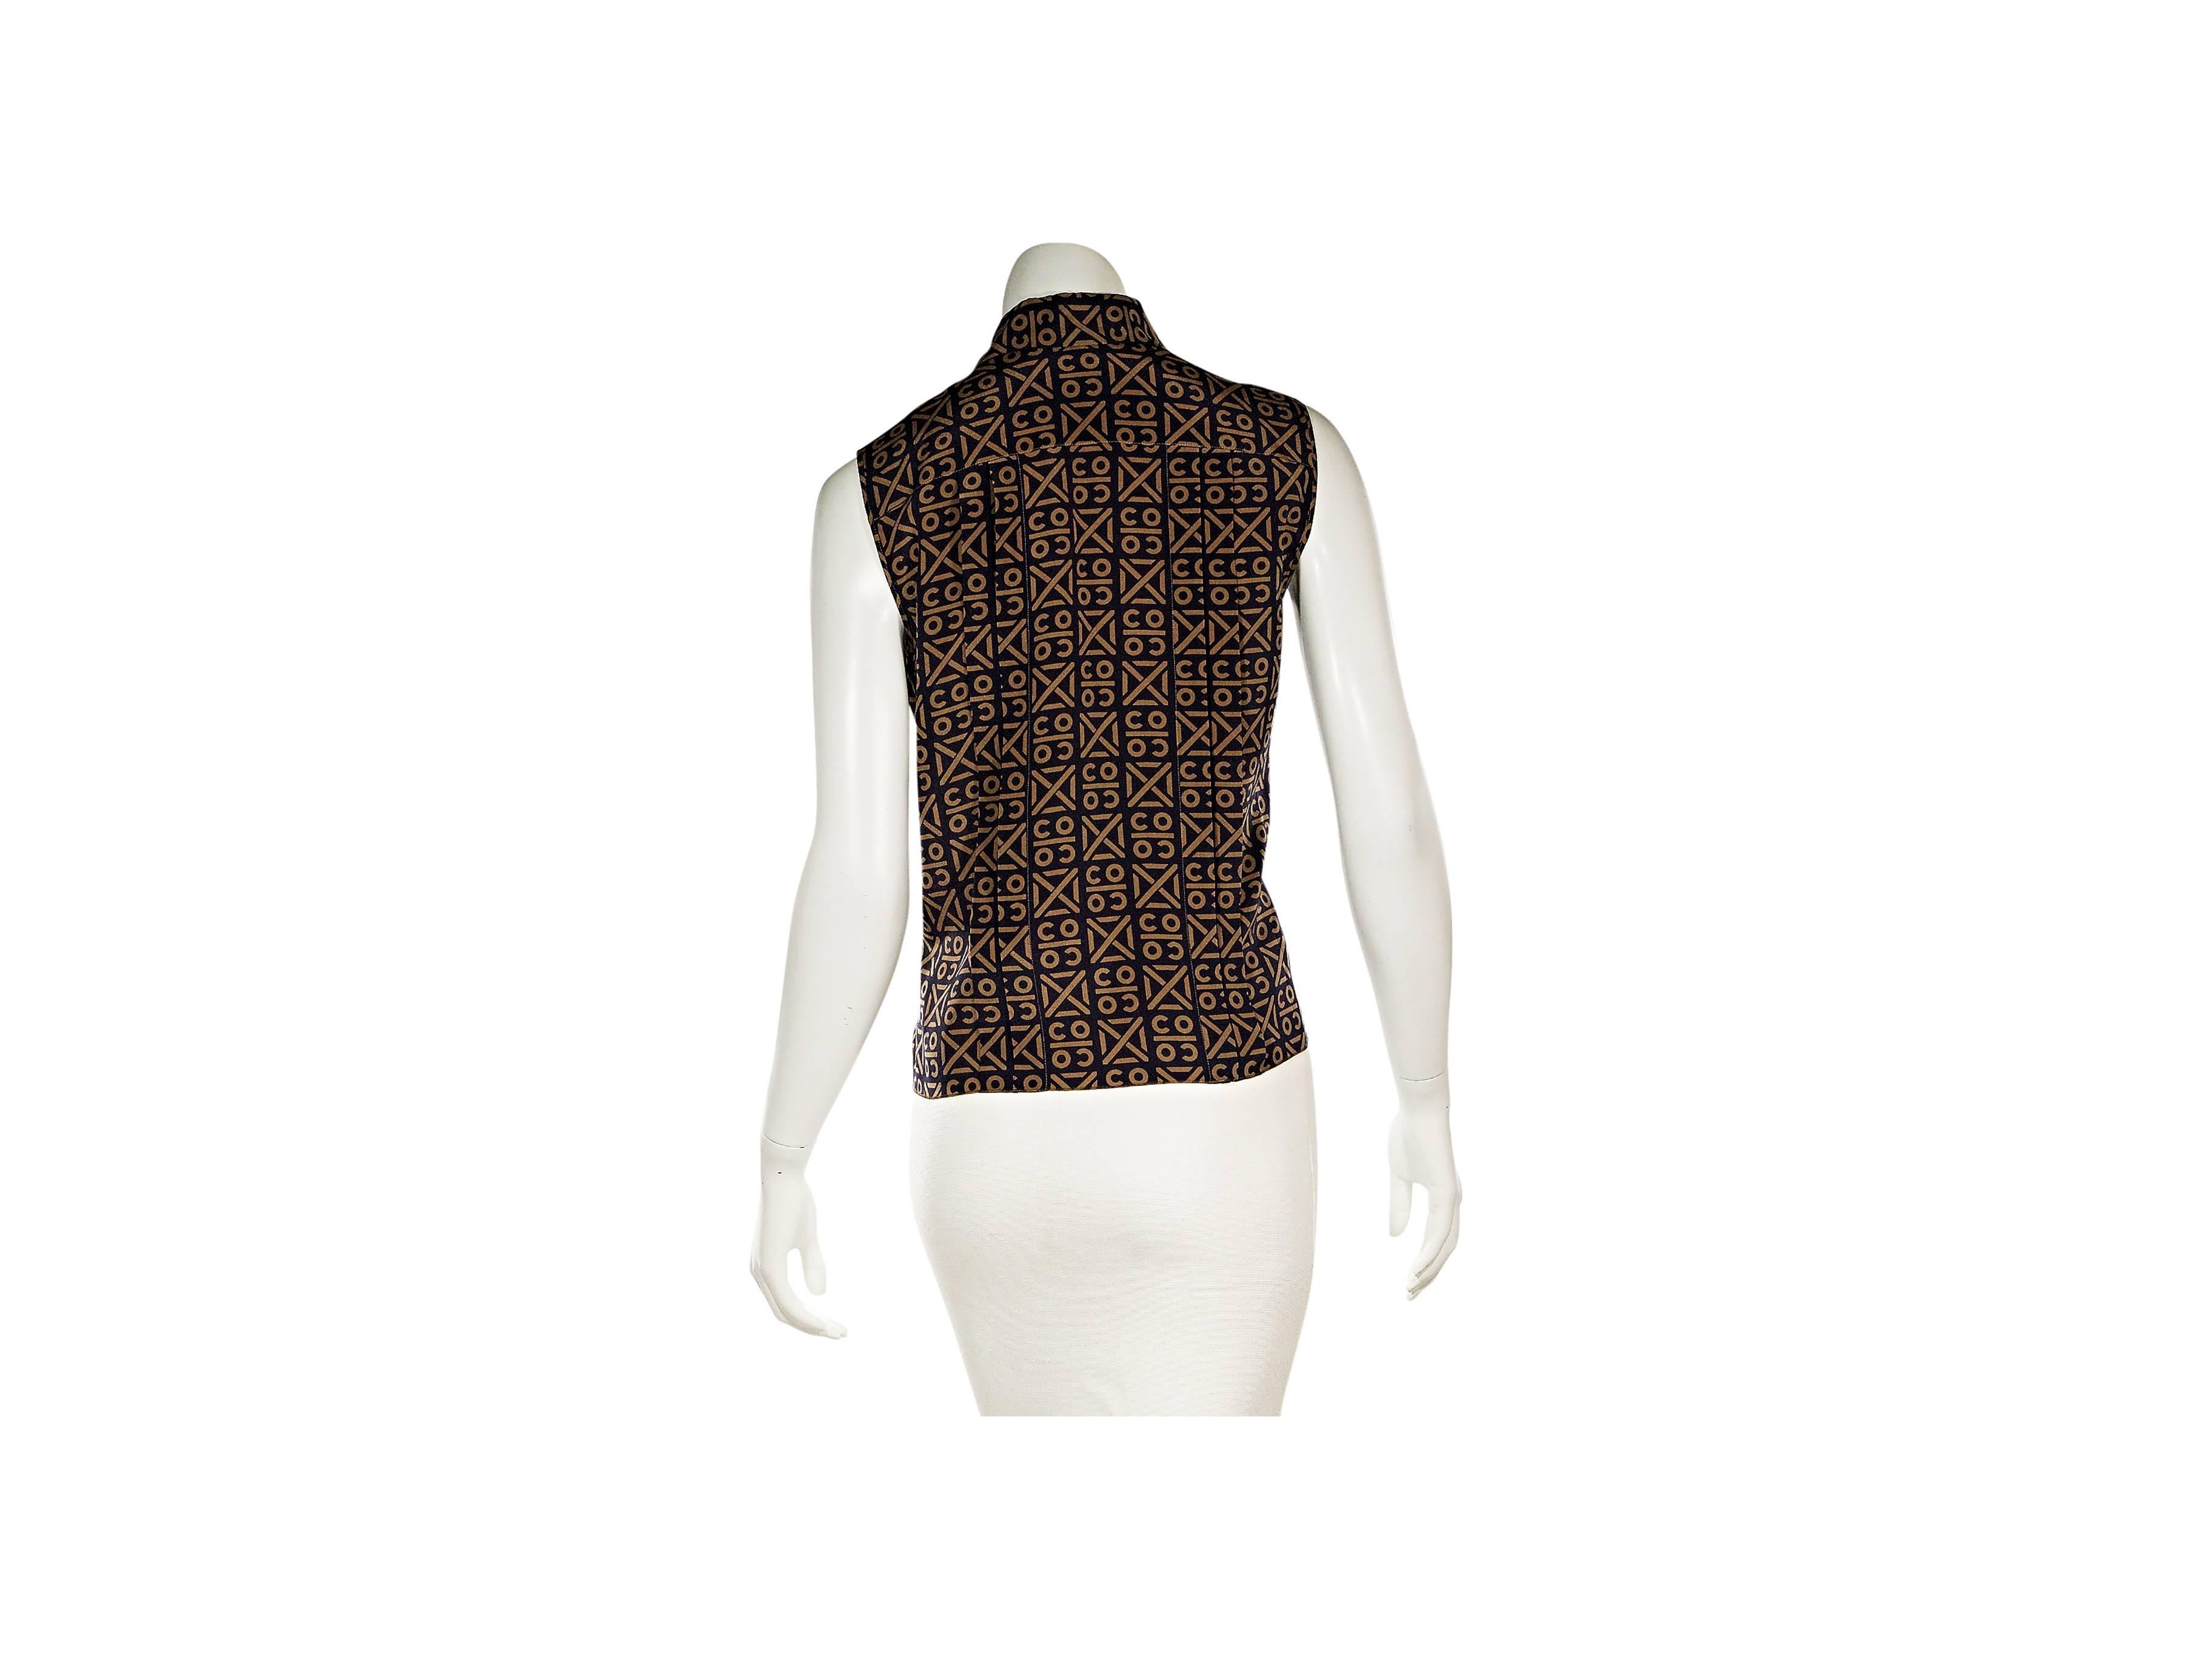 Product details:  Brown printed silk blouse by Chanel.  Front and back pleats.  Sleeveless.  Point collar.  Concealed closure.  
Condition: Excellent. 